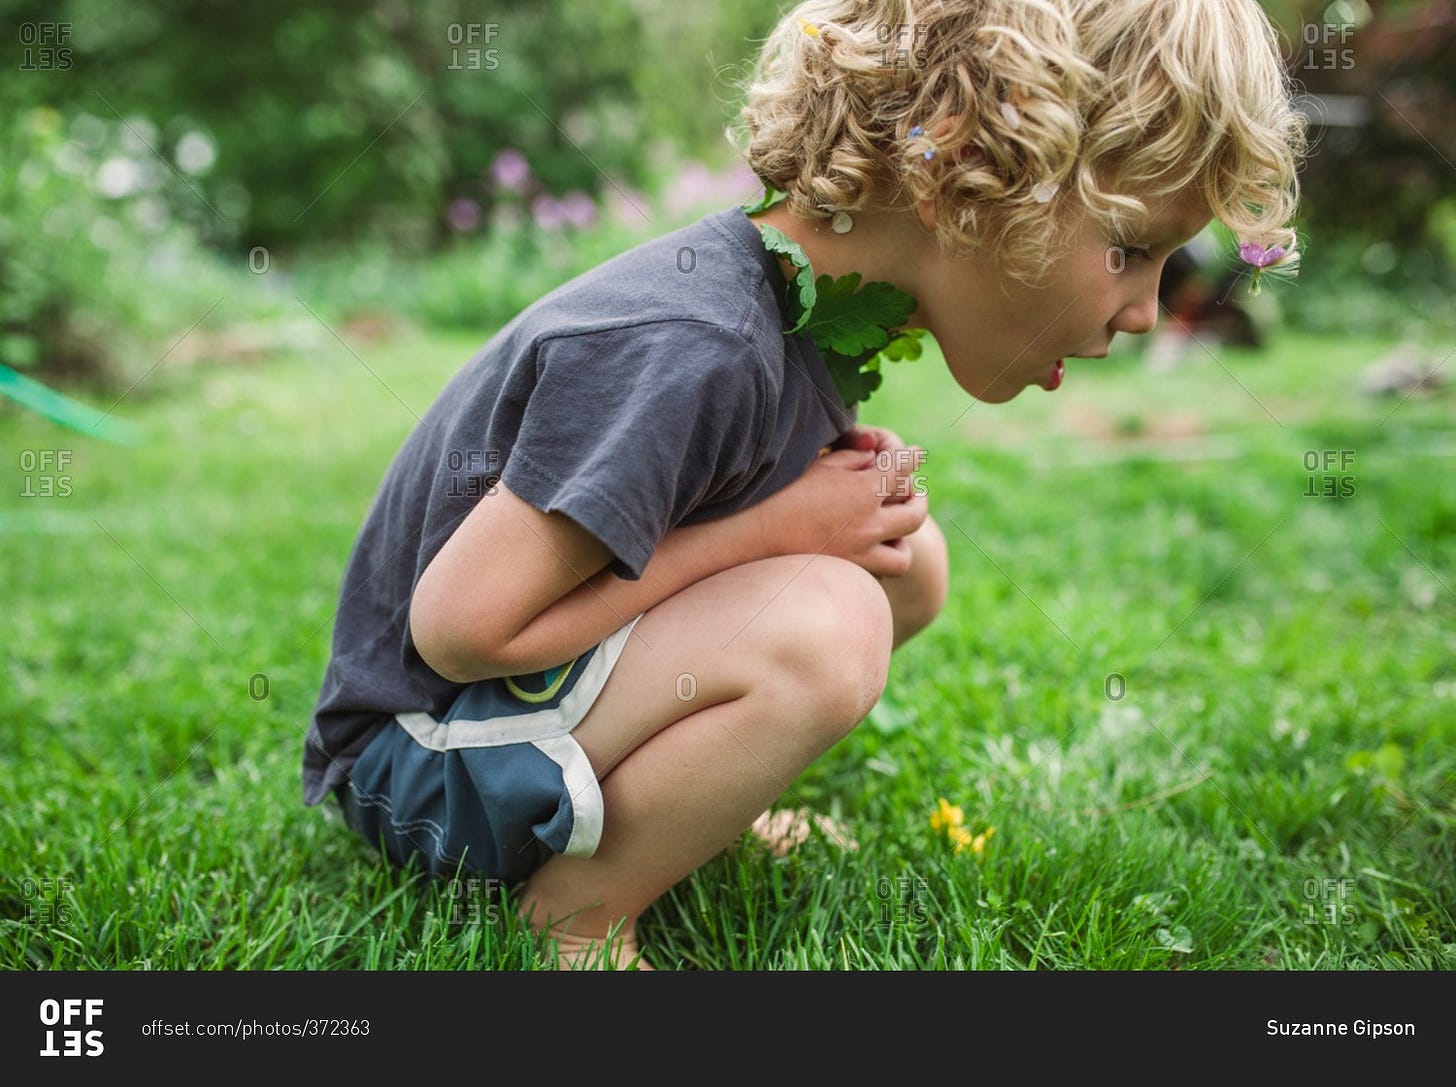 Boy squatting looking down at the grass stock photo - OFFSET